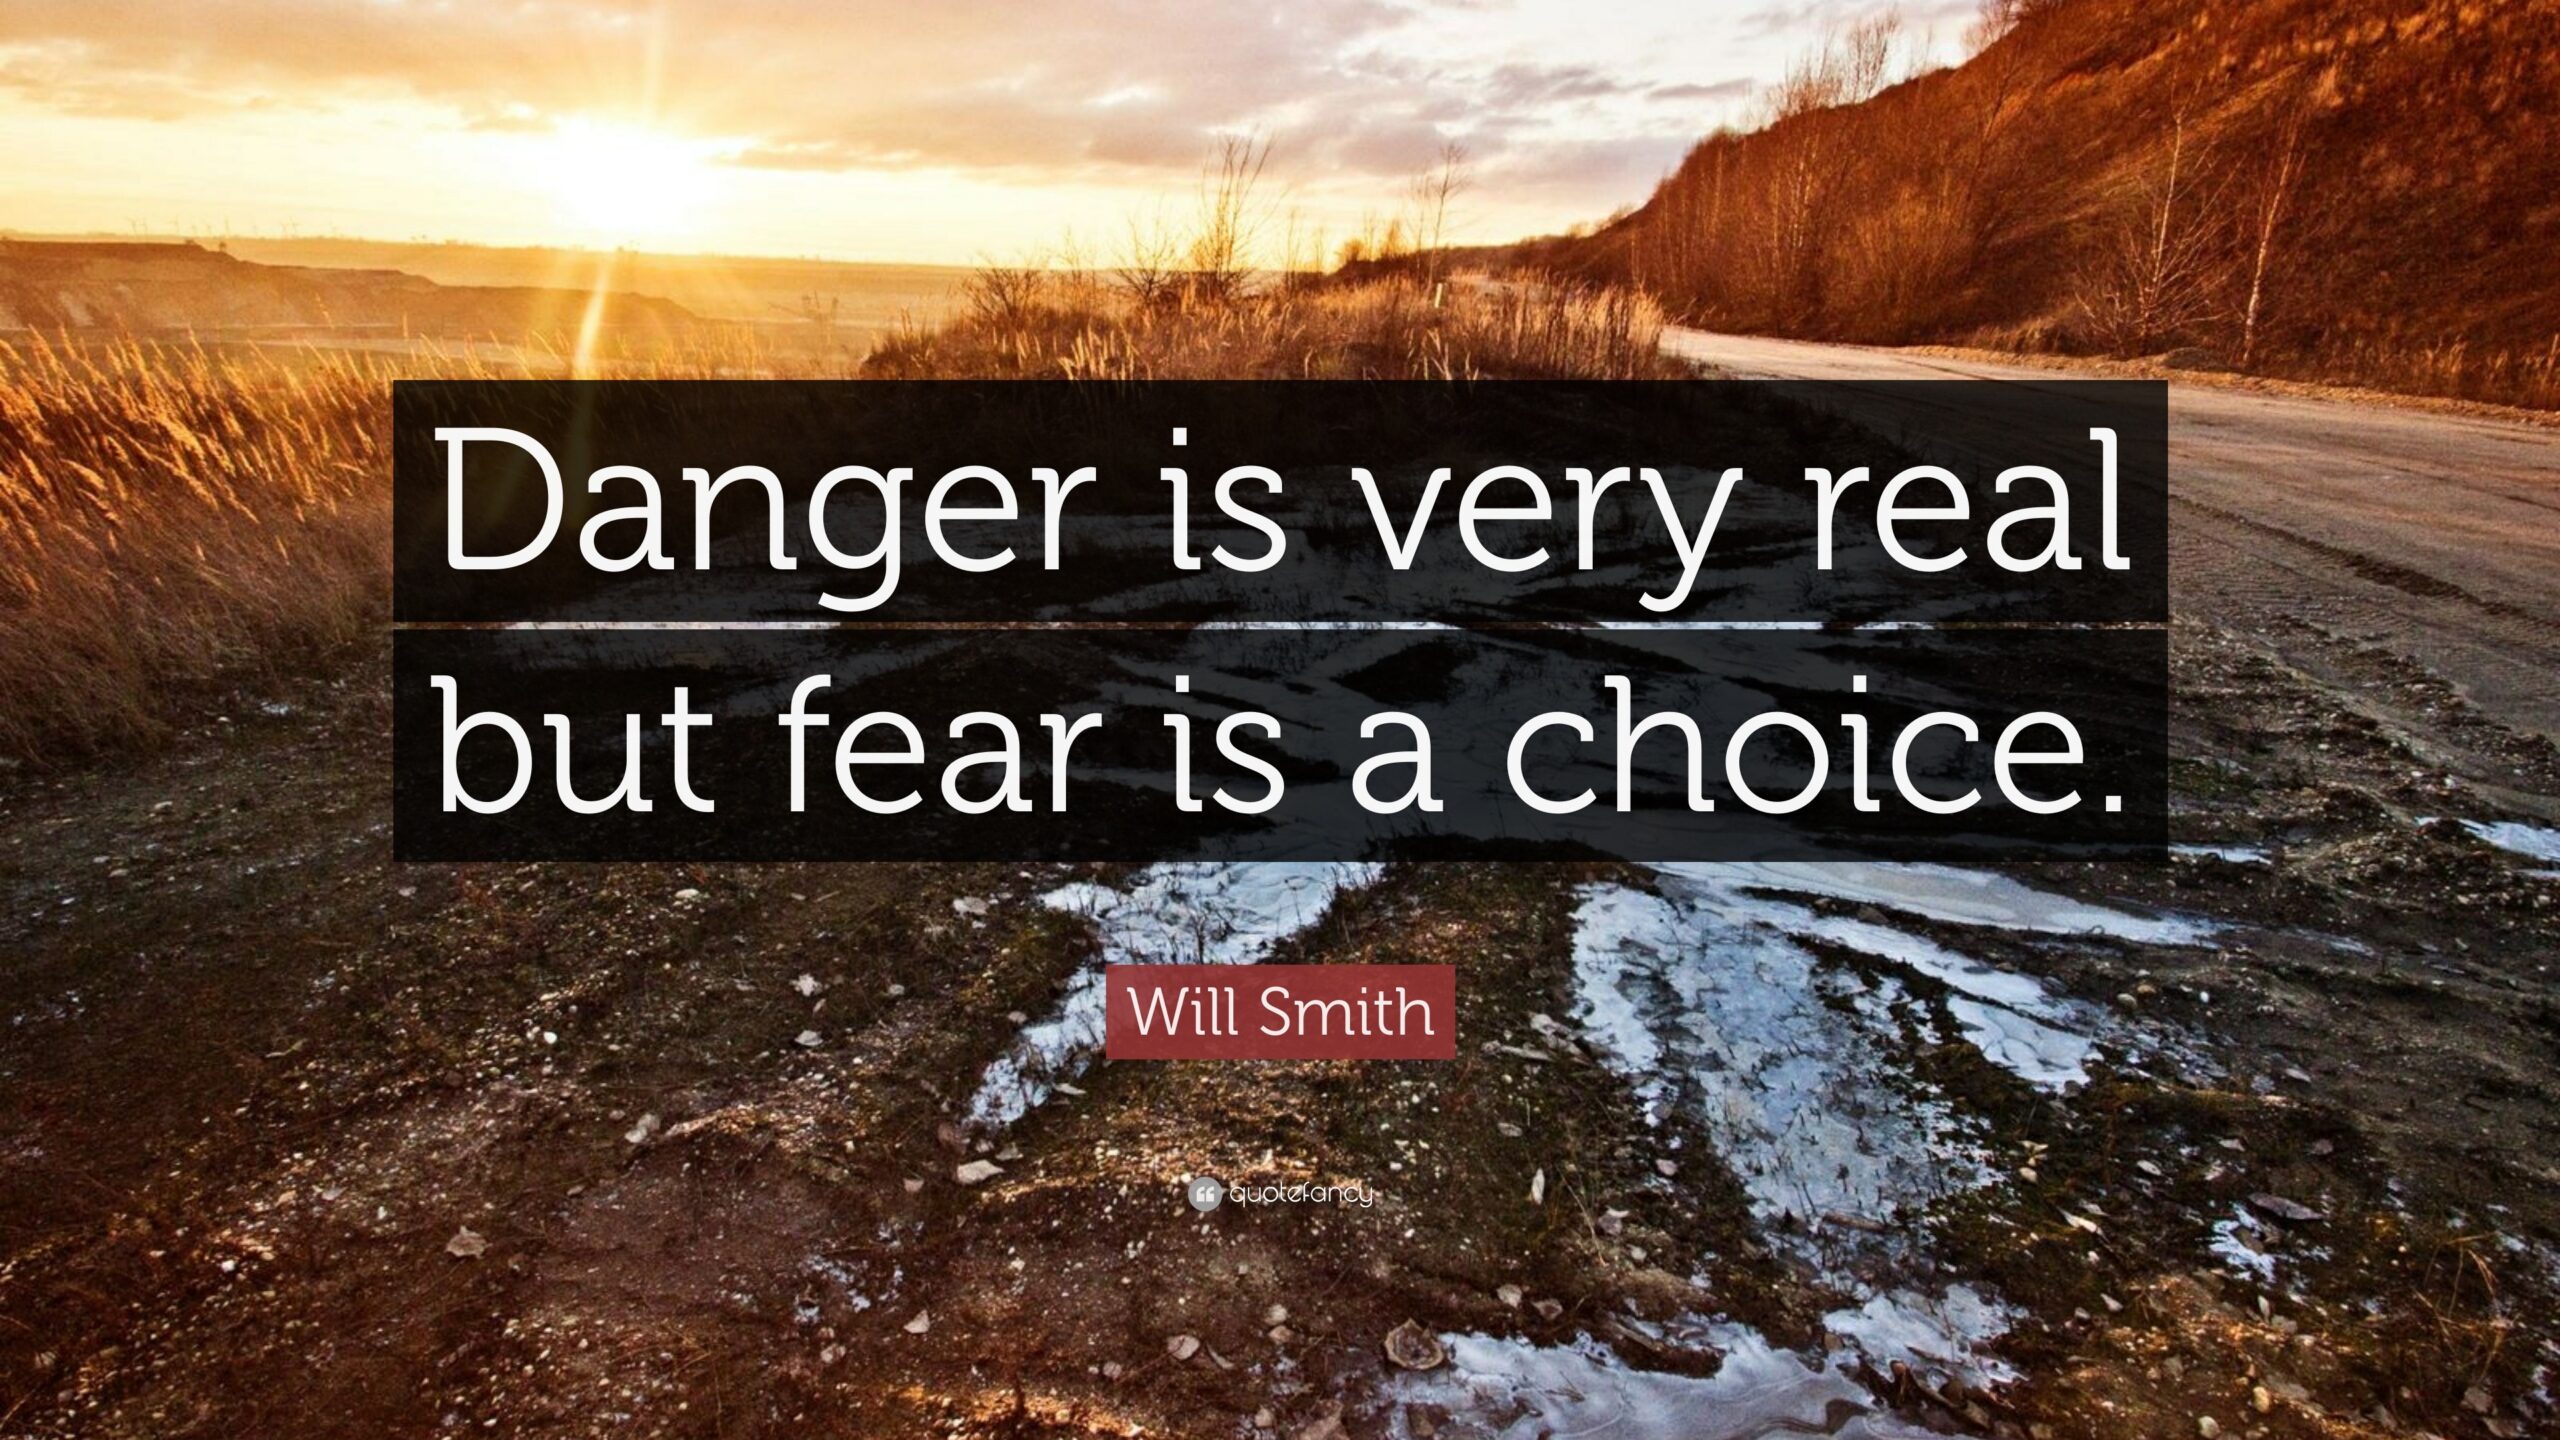 Short Quotes About Being Real Danger Is Very Real But Fear Is A Choice.